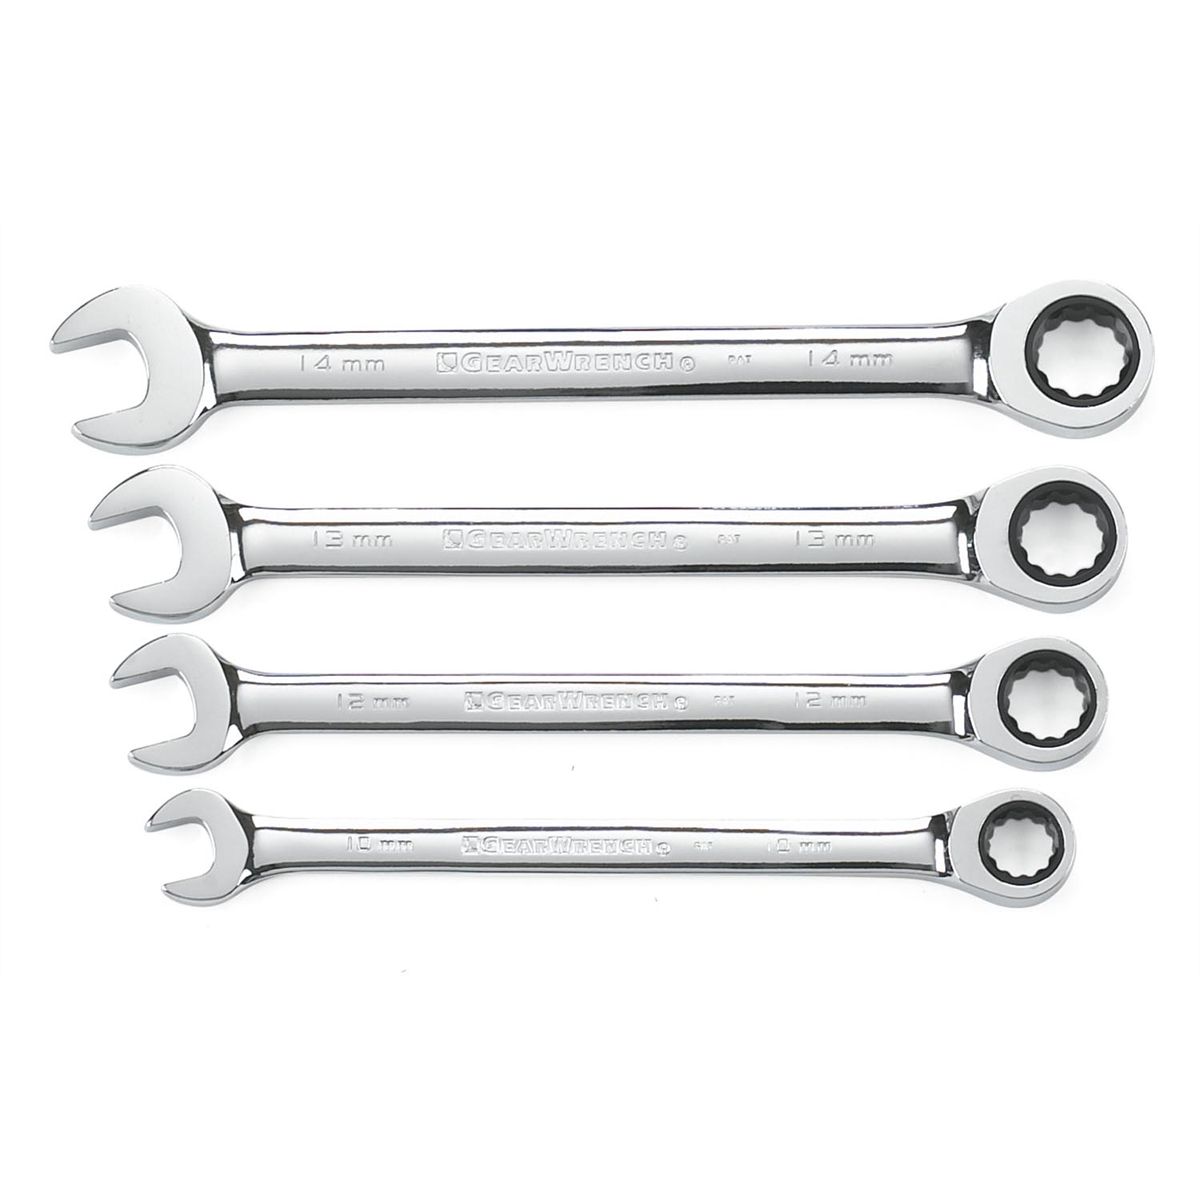 Metric Gearwrench Set 10mm-14mm 4 Pc